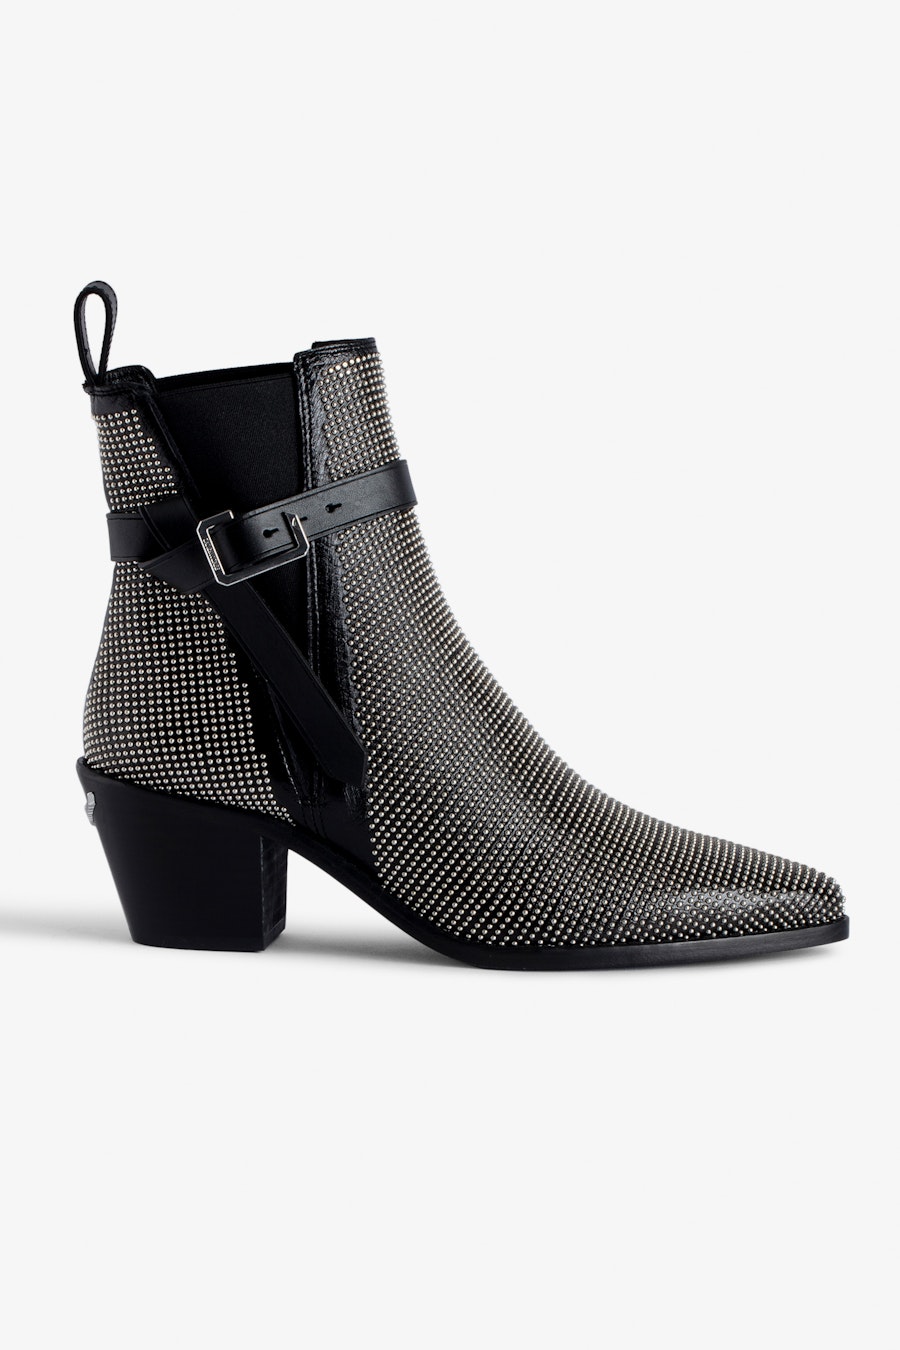 ZADIG&VOLTAIRE Tyler Studs Ankle Boots